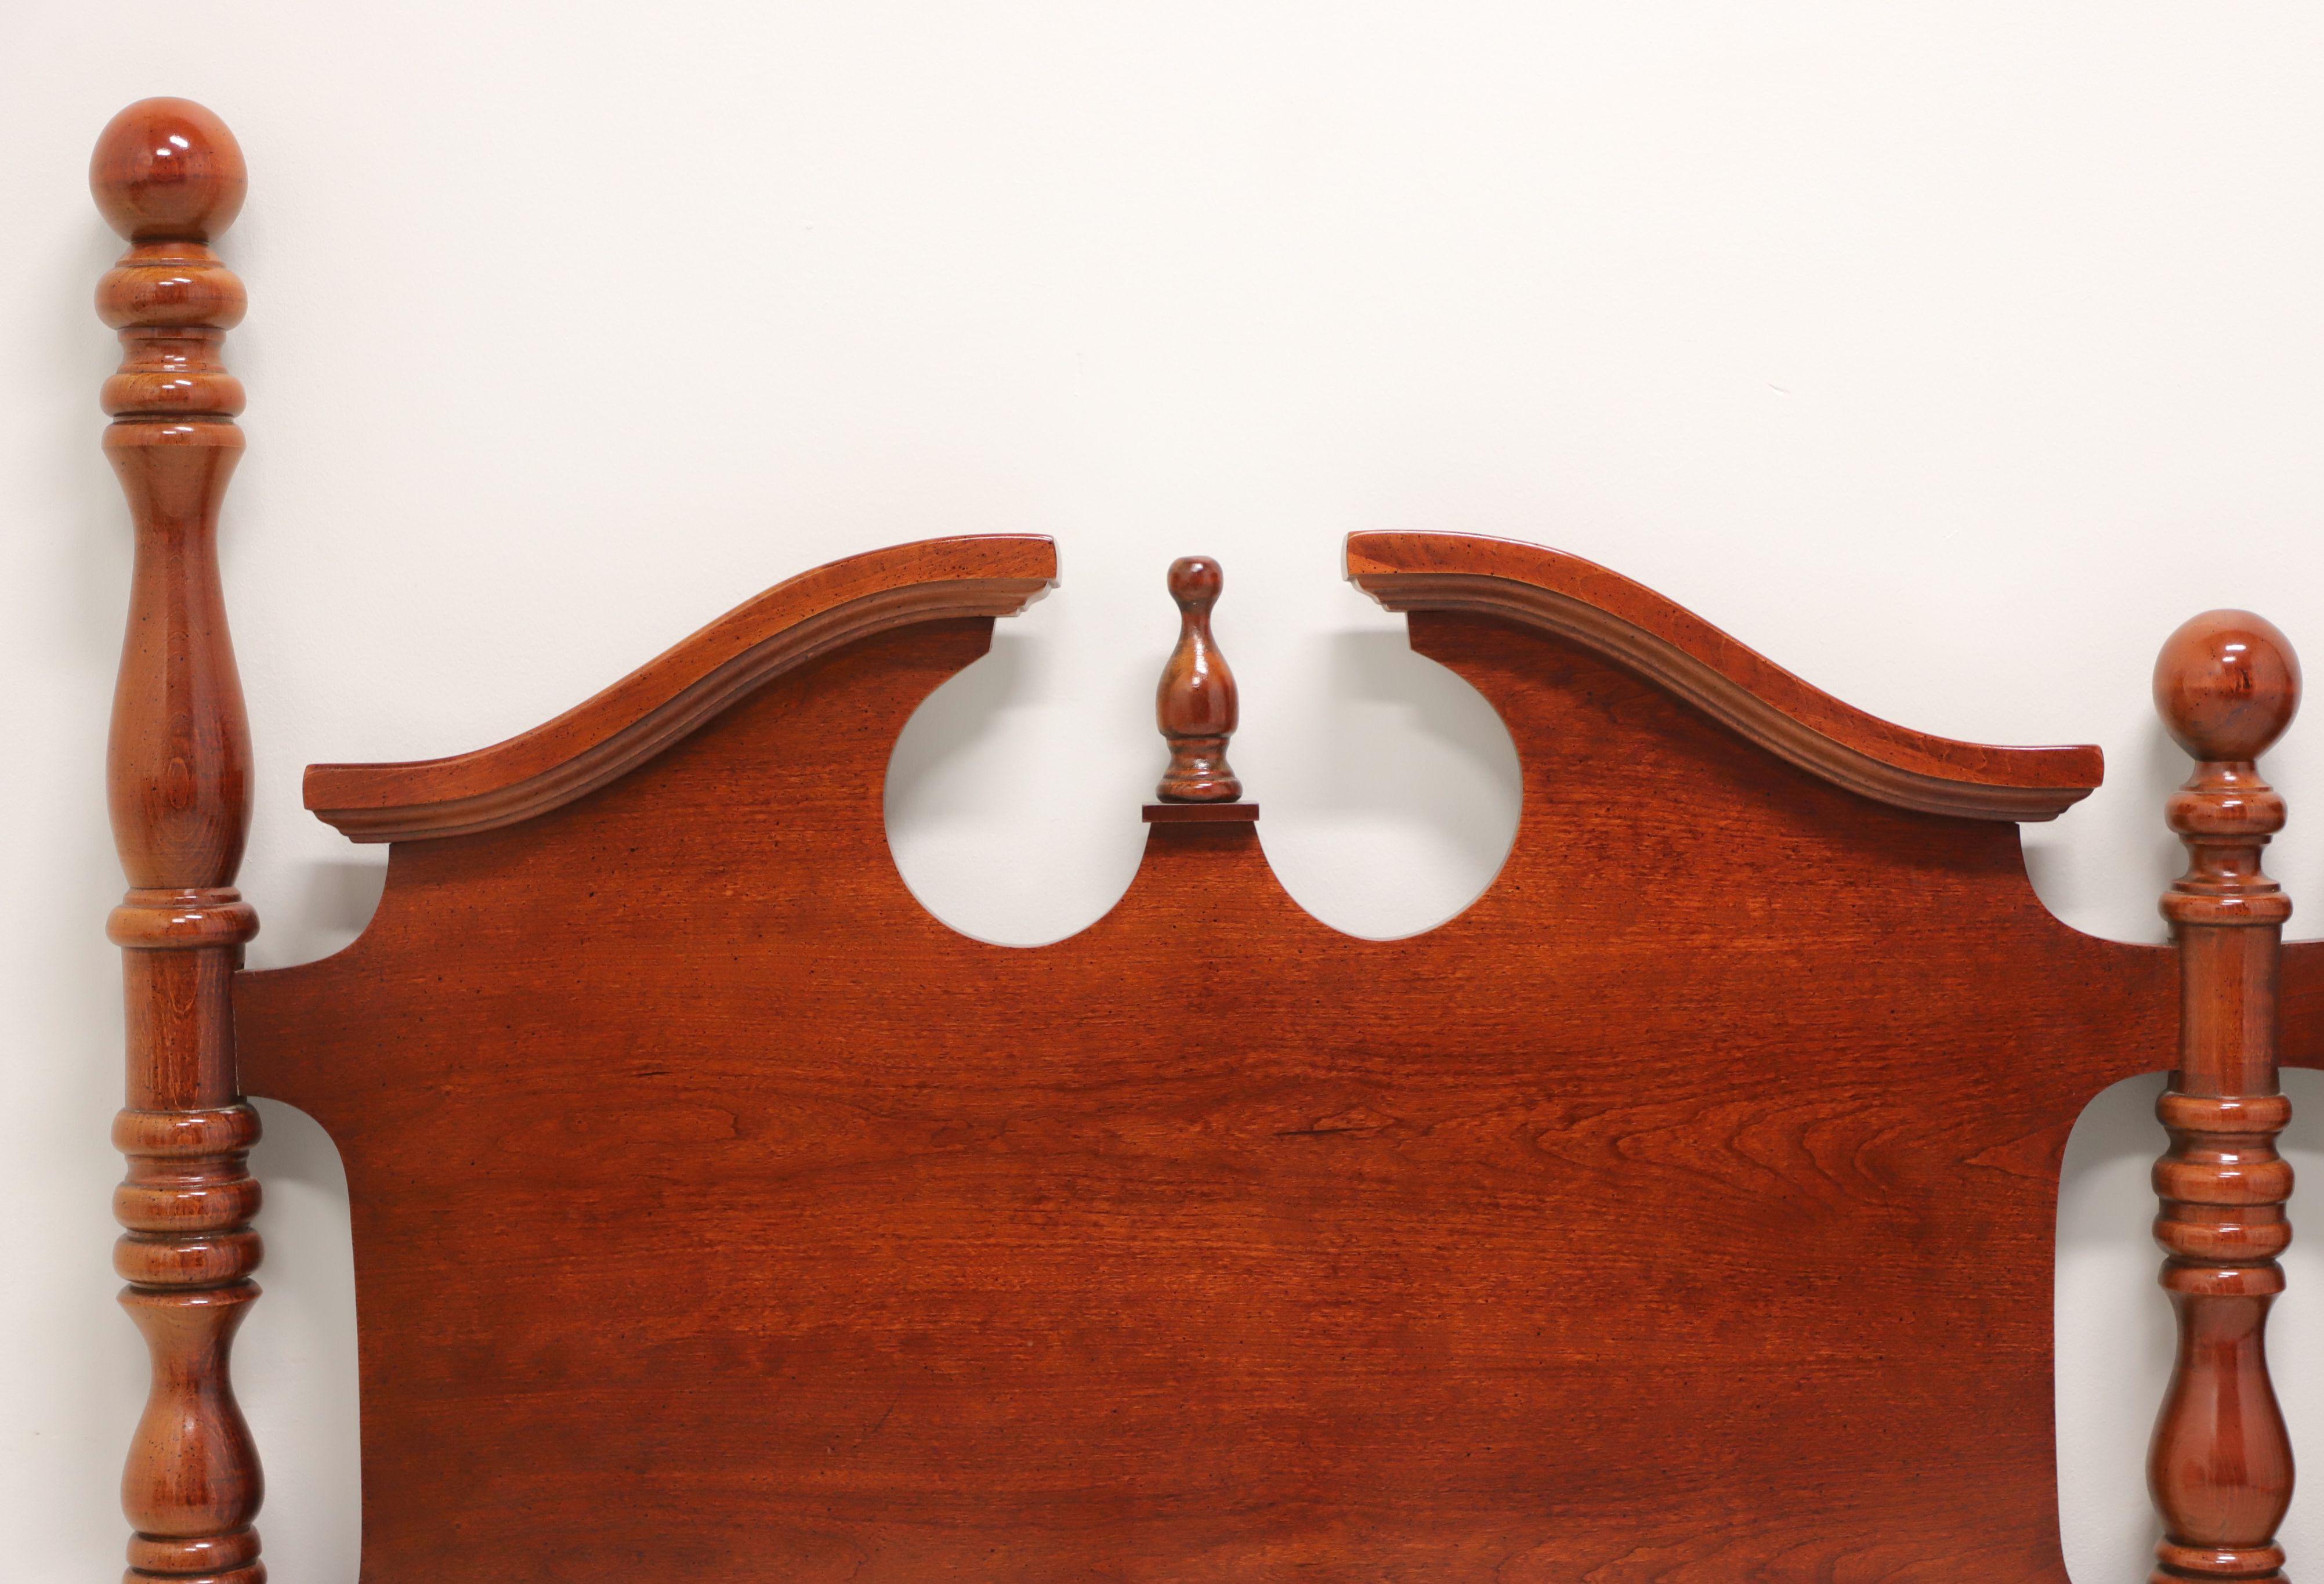 A Traditional Georgian style king Size short poster headboard by Thomasville. Solid cherry, double pediments with center finials, three turned posts capped with round ball like finials, and square lower posts. Made in North Carolina, USA, in the